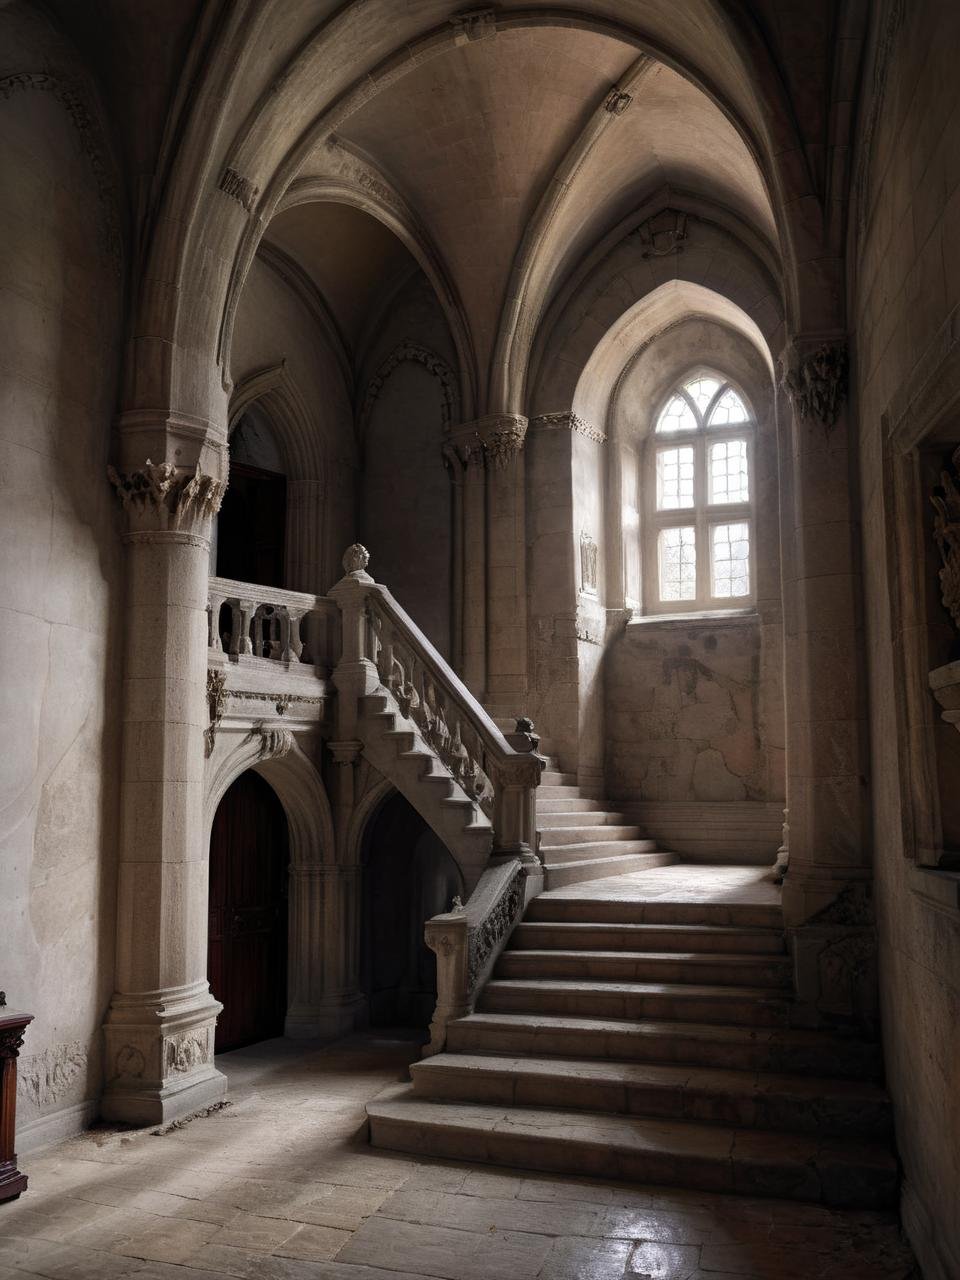 Hyperrealistic art manor house, castle indoor, hall, stairs, column, arch  <lora:polyhedron_god rays-000007:0.6>  <lora:Castle_manor:1.1>  . Extremely high-resolution details, photographic, realism pushed to extreme, fine texture, incredibly lifelike